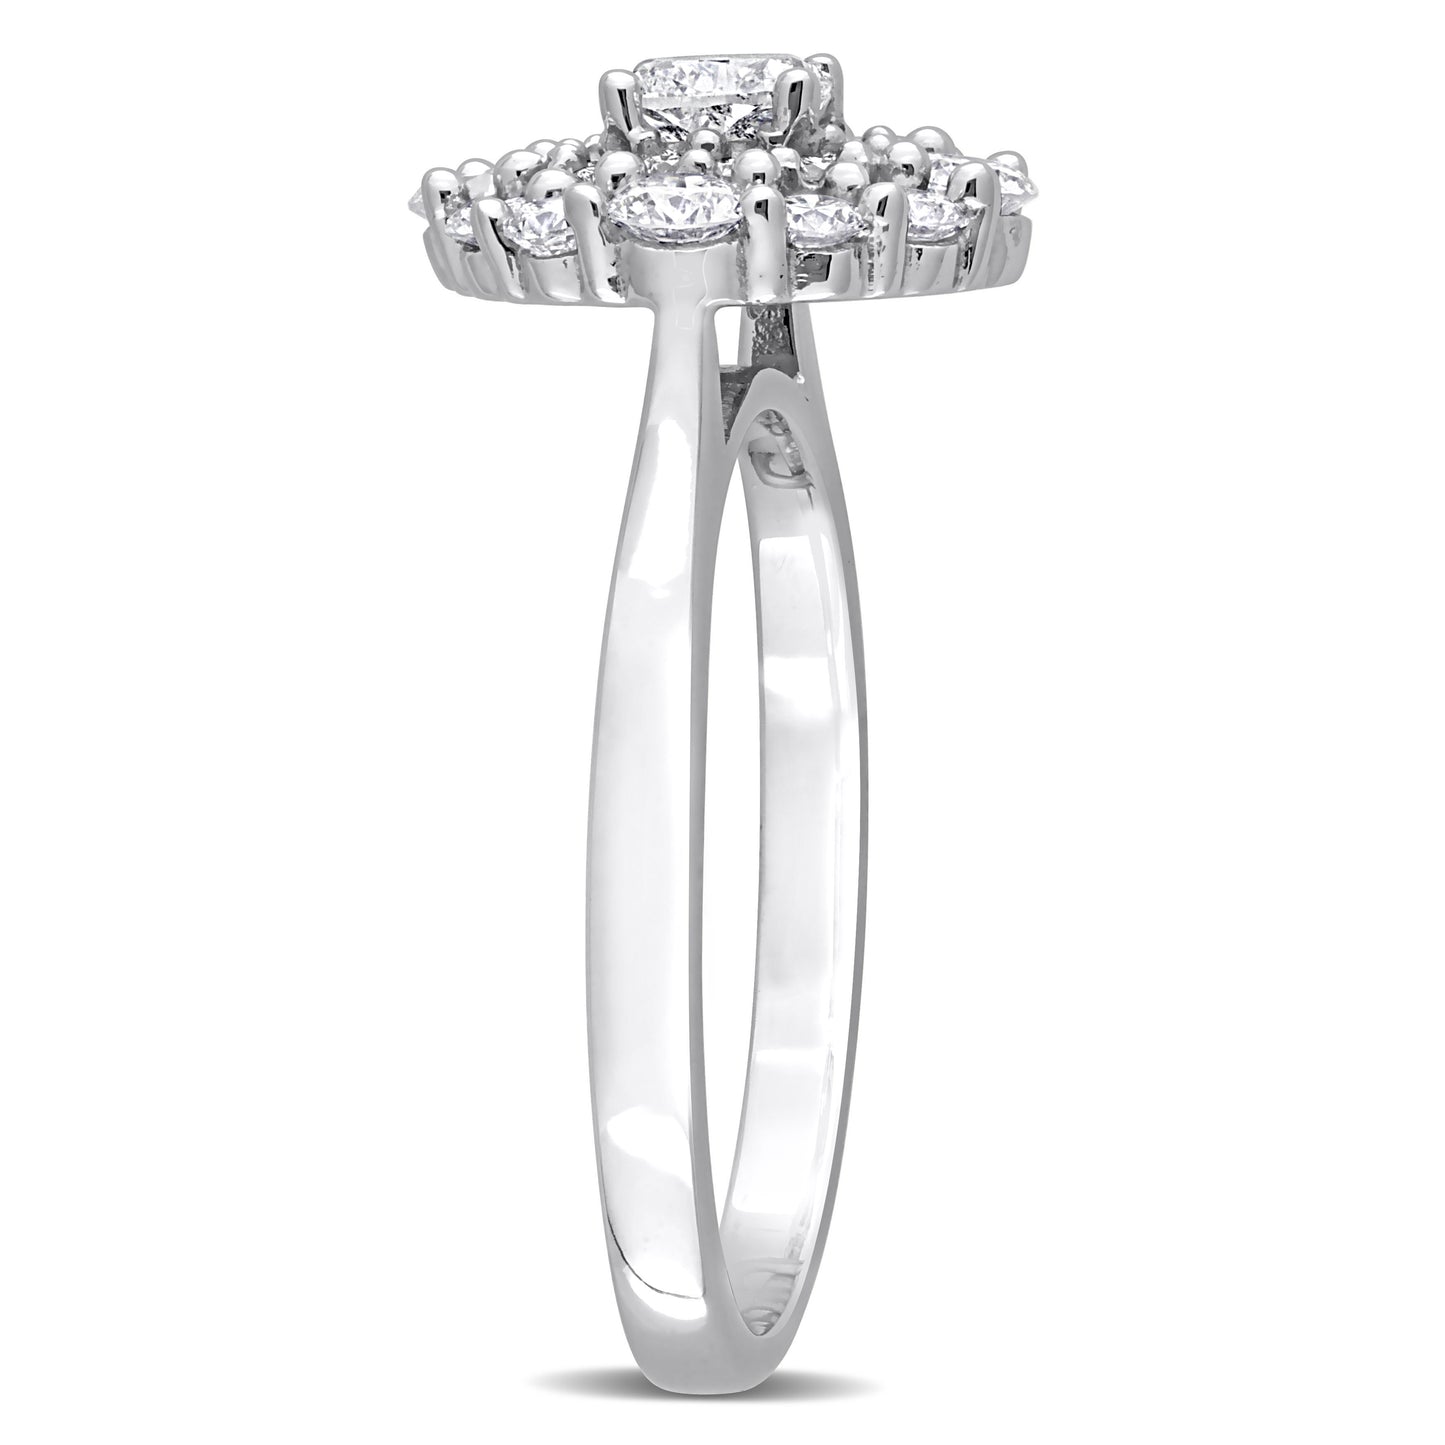 Cushion & Round Diamond Cluster Ring in 14k White Gold